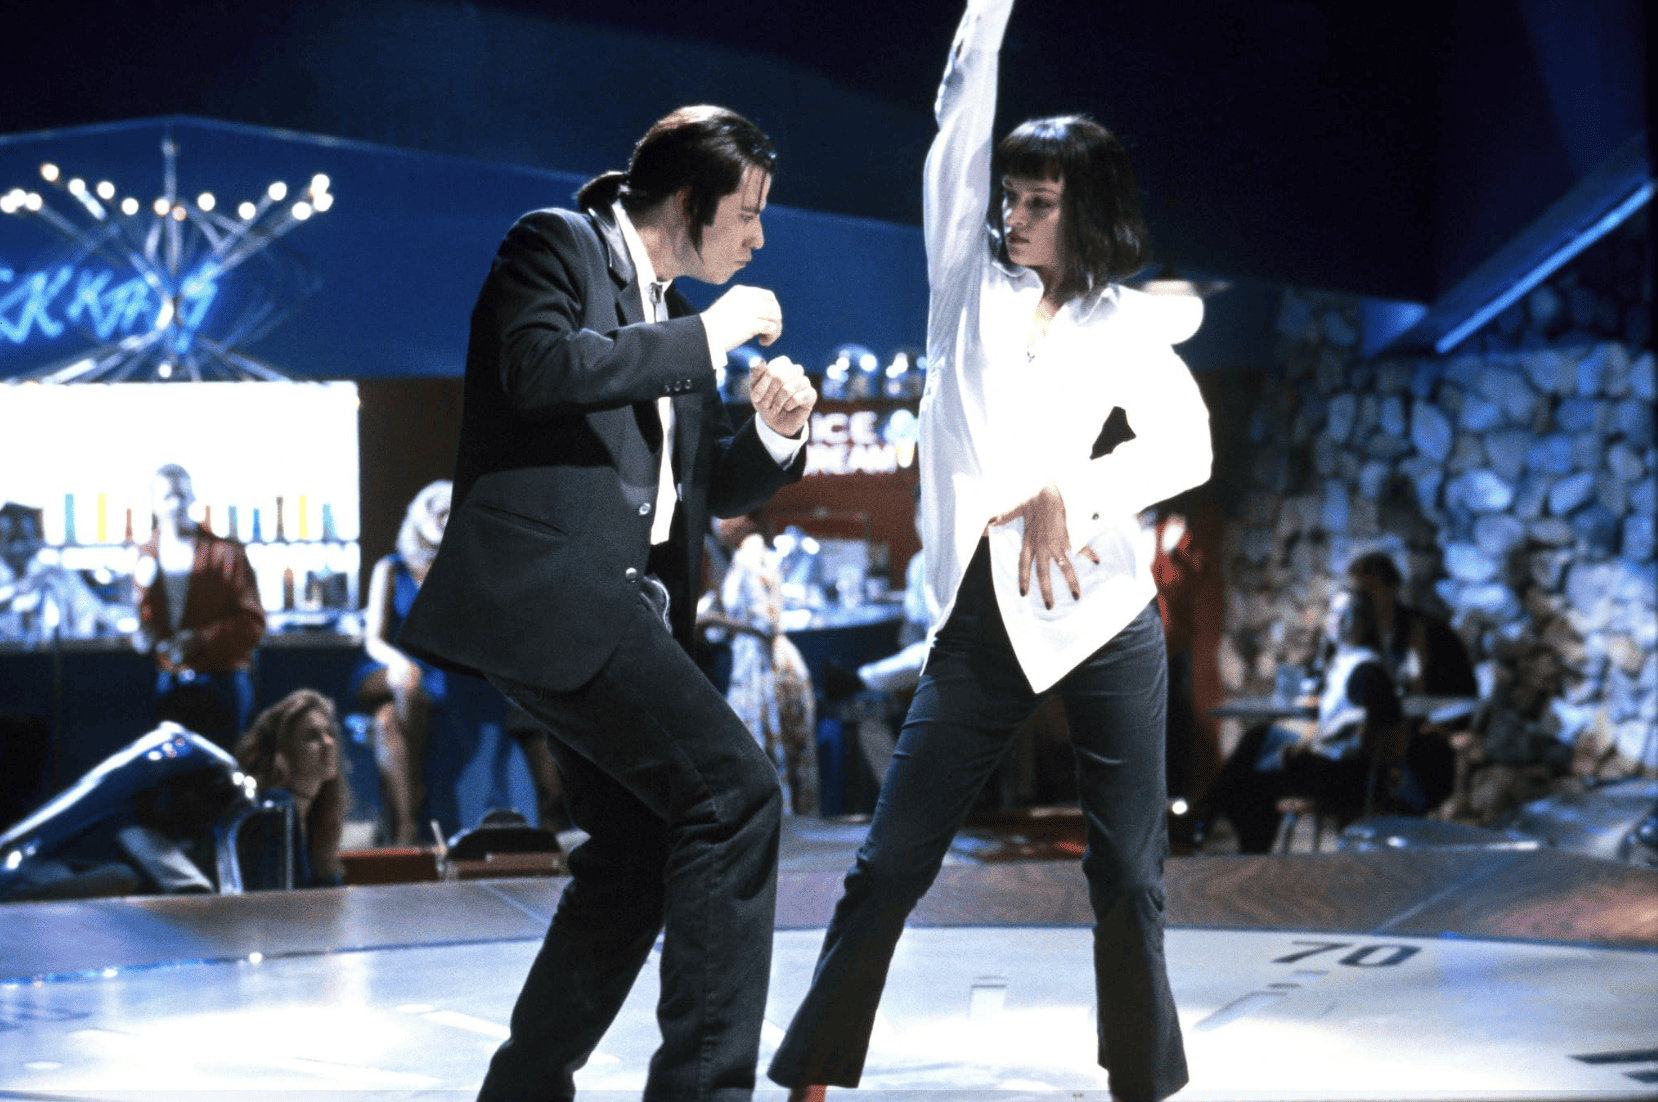 A man and a woman dance at a nightclub in this image from Miramax.